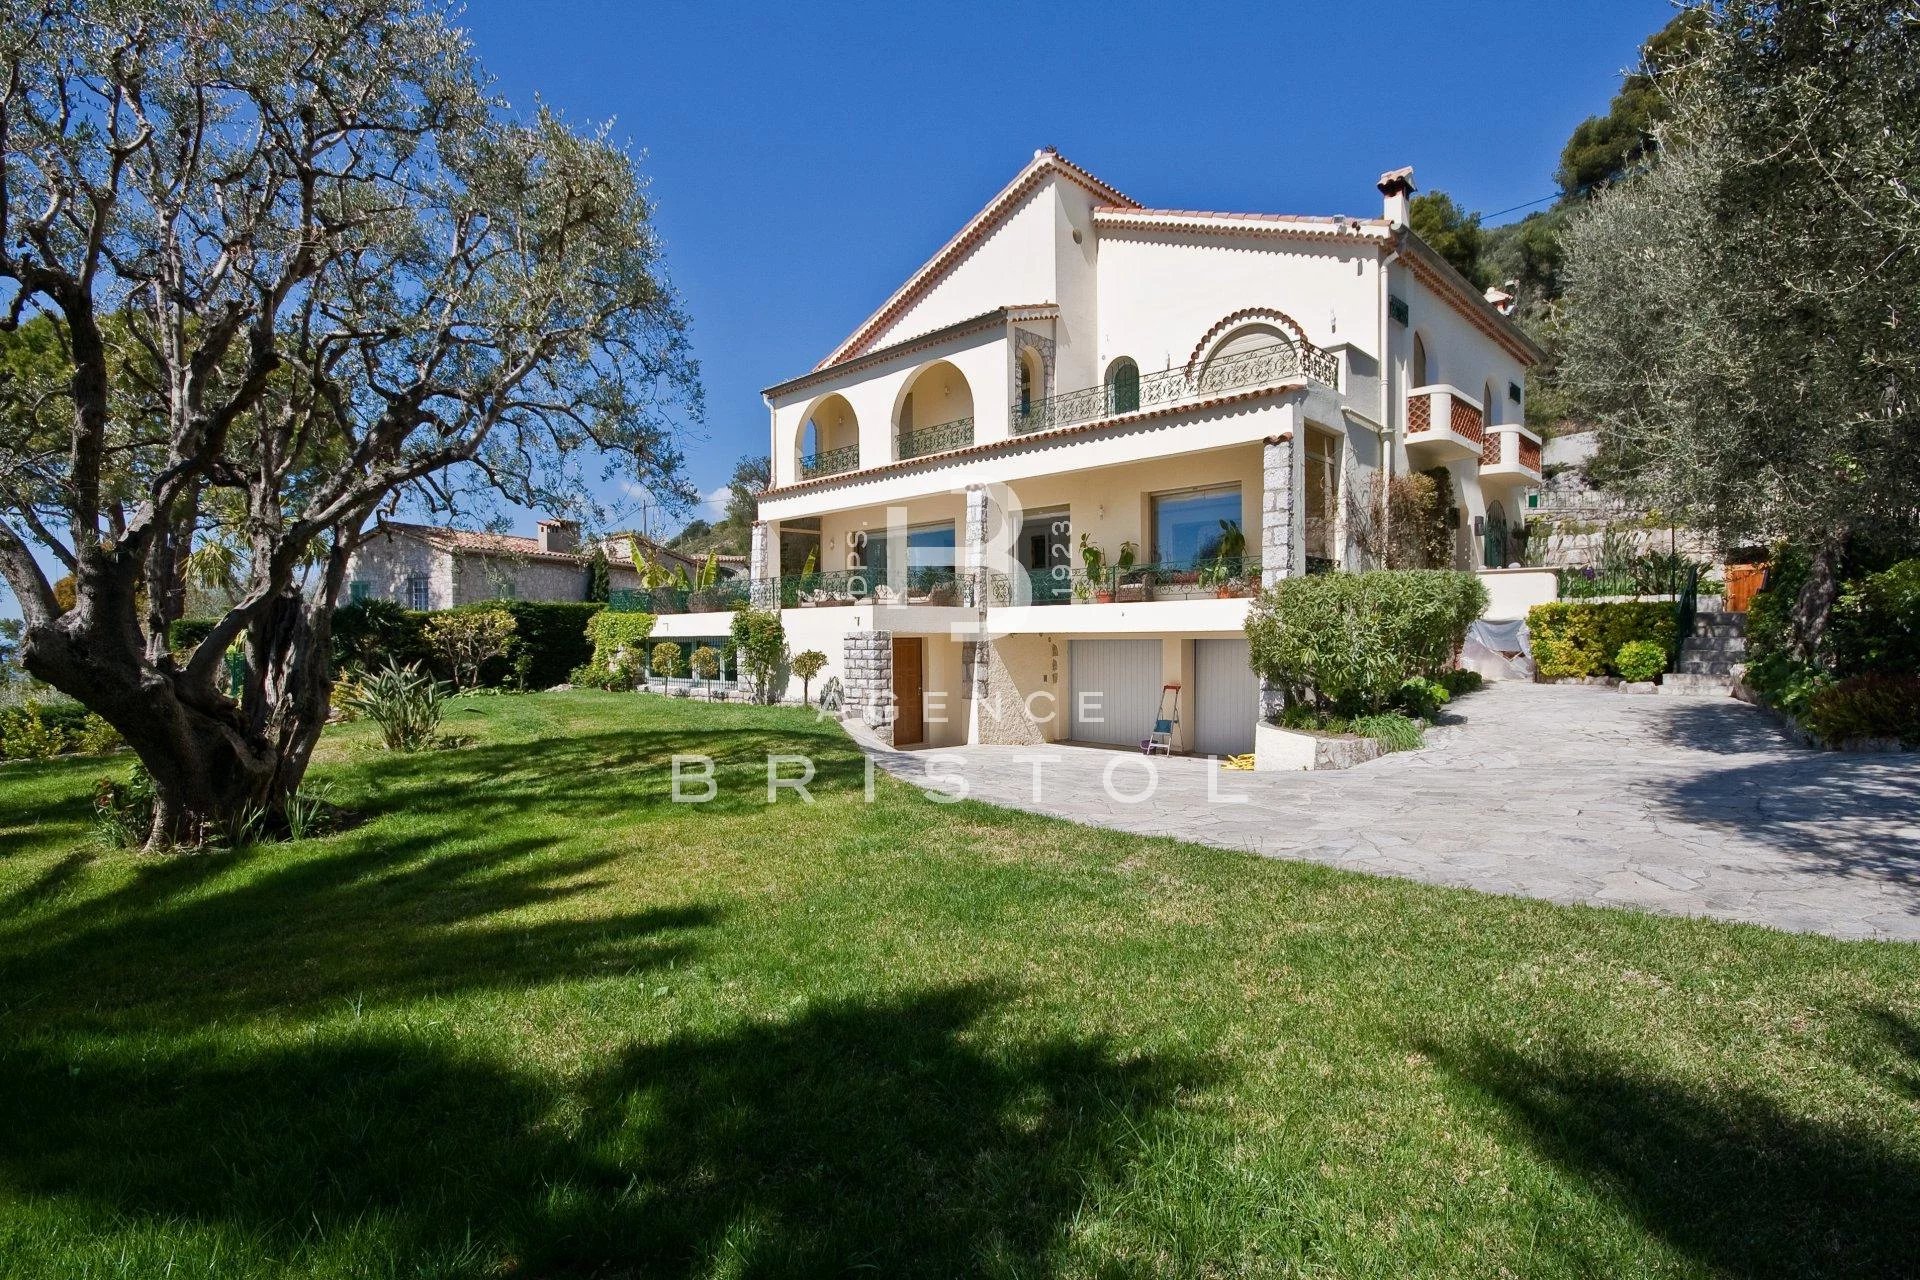 Villefranche-sur-Mer Property - Flat Garden - Sea View - Sell & Buy with Agence Bristol